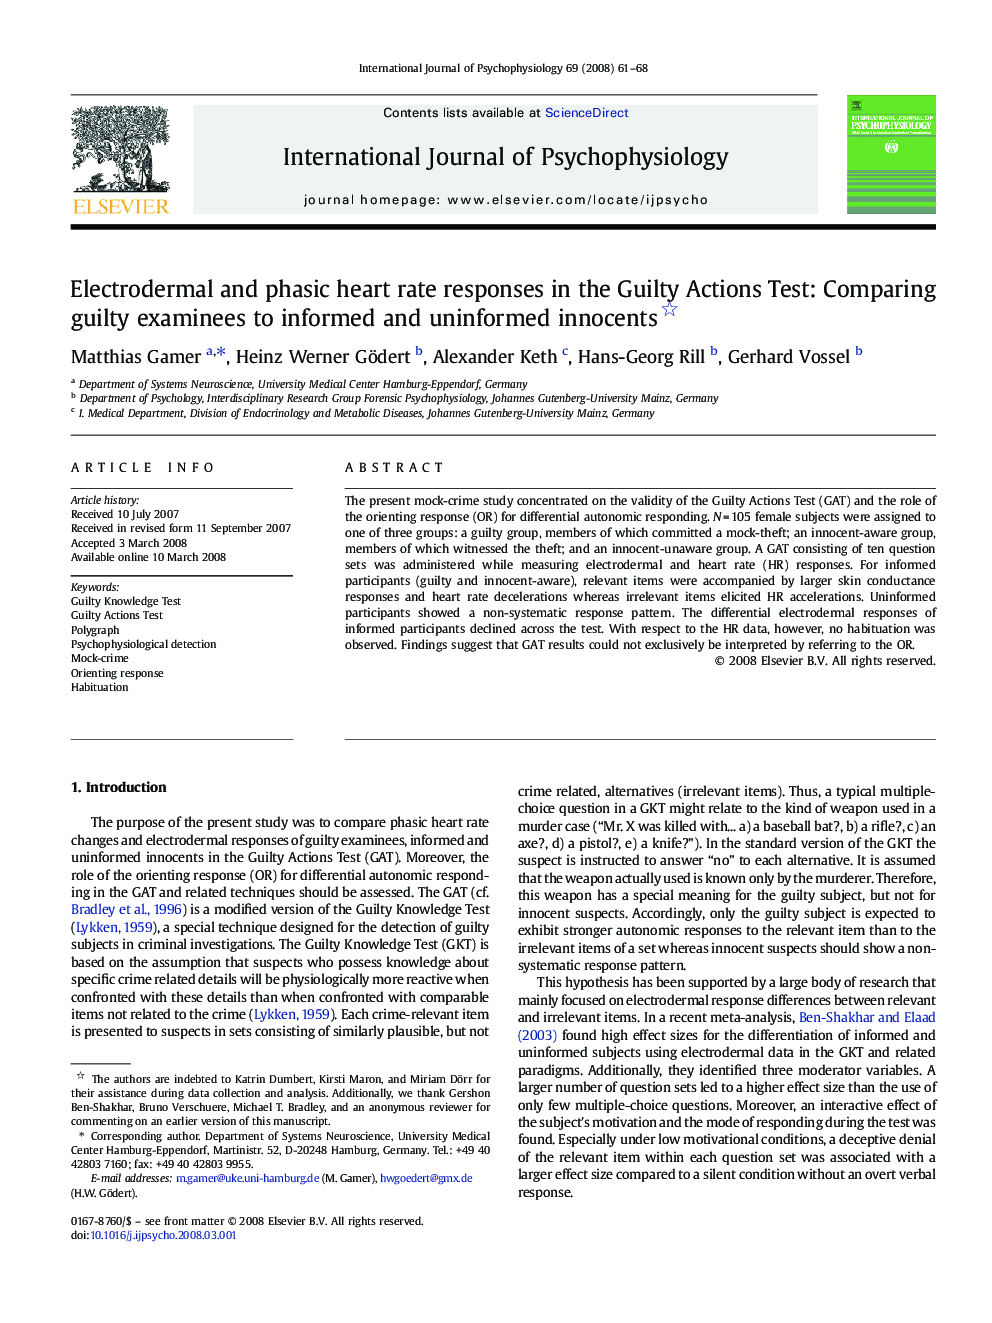 Electrodermal and phasic heart rate responses in the Guilty Actions Test: Comparing guilty examinees to informed and uninformed innocents 